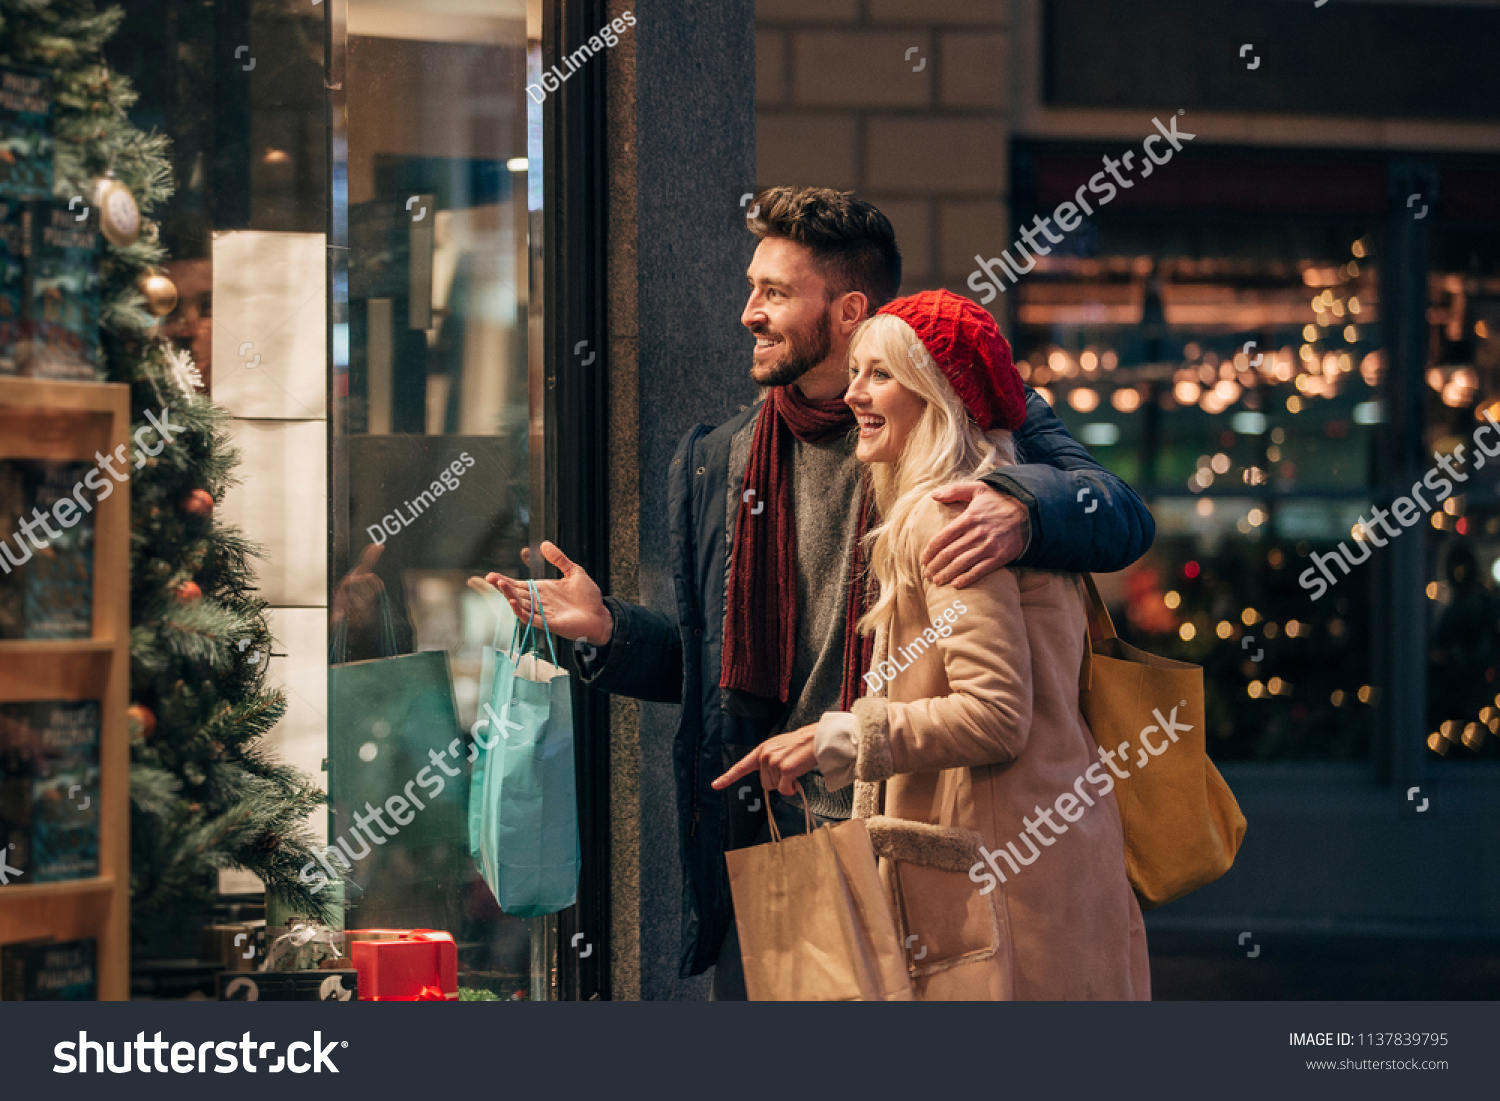 Side view of a couple doing some window shopping at christmas. The mid adult male has his arm around the mid adult female and they are talking about wats in the window. #1137839795